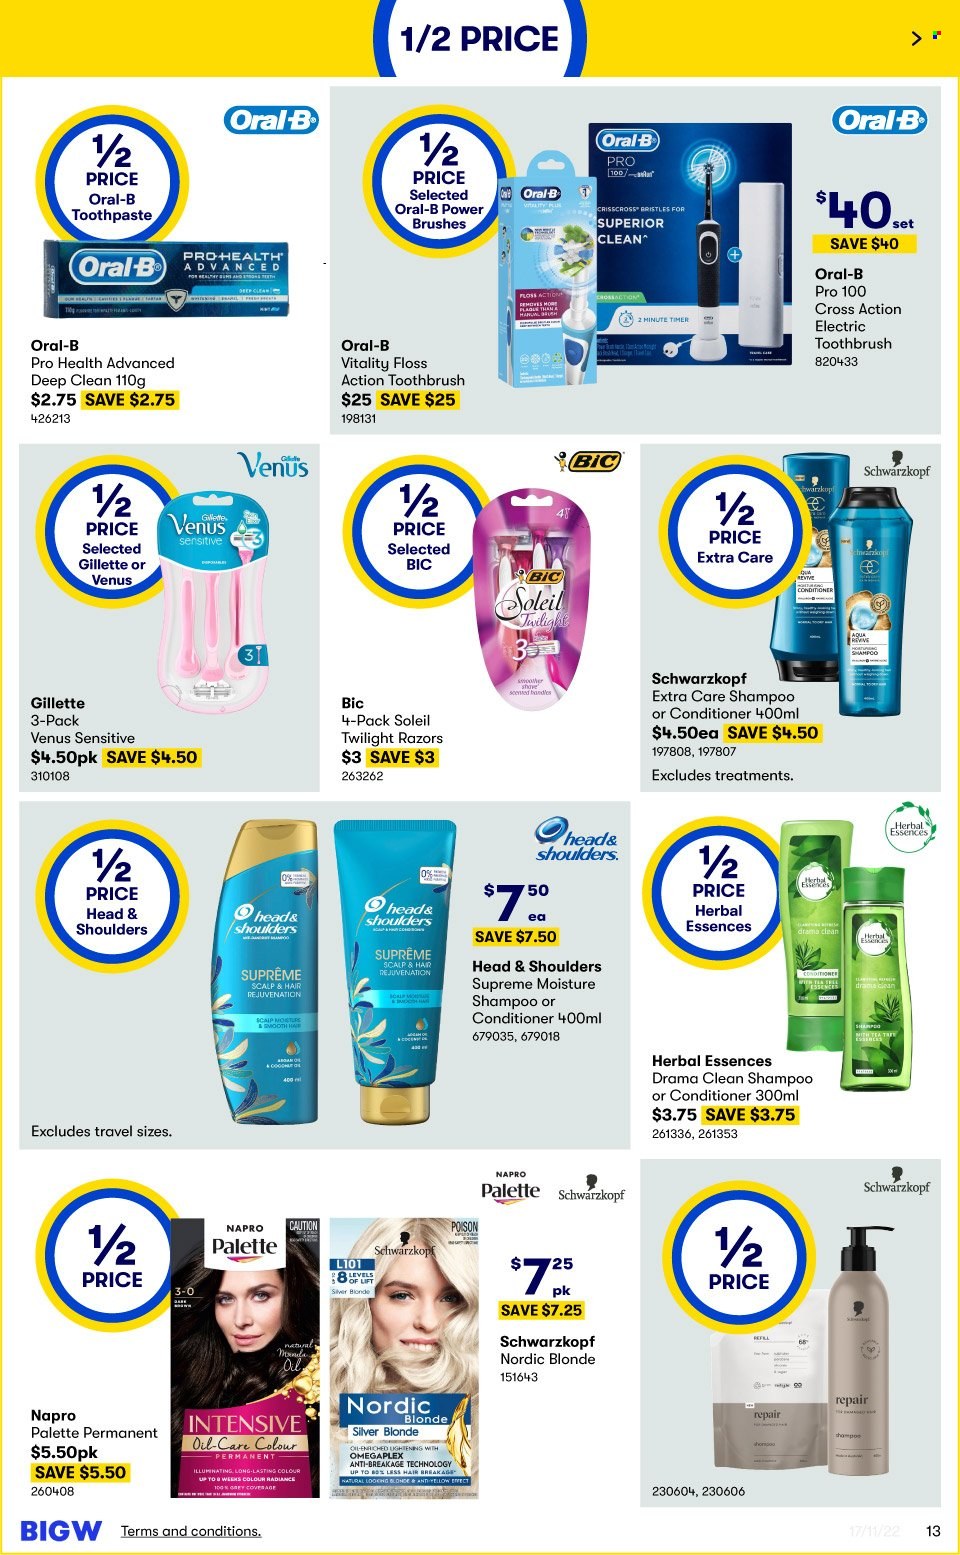 thumbnail - BIG W Catalogue - Sales products - shampoo, Schwarzkopf, toothbrush, Oral-B, toothpaste, conditioner, Head & Shoulders, Palette, Herbal Essences, BIC, Gillette, Venus, electric toothbrush. Page 13.